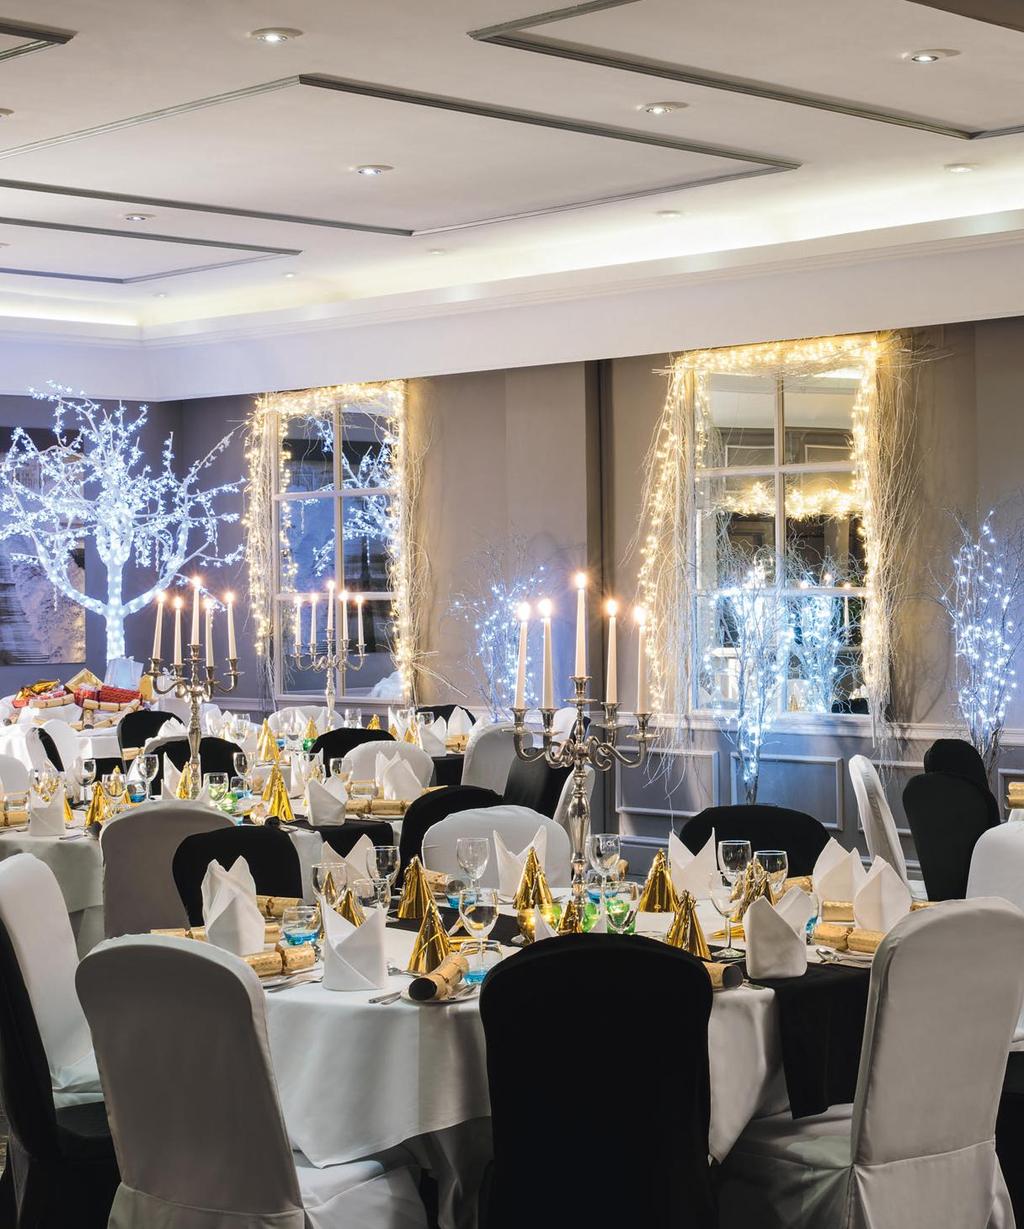 WOUGHTON HOUSE FESTIVE EVENTS FESTIVE EVENTS FESTIVE LUNCHES & DINNERS Throughout December Two courses from 22.50 per adult, 10.50 per child (aged 4-11) Three courses from 25 per adult, 12.